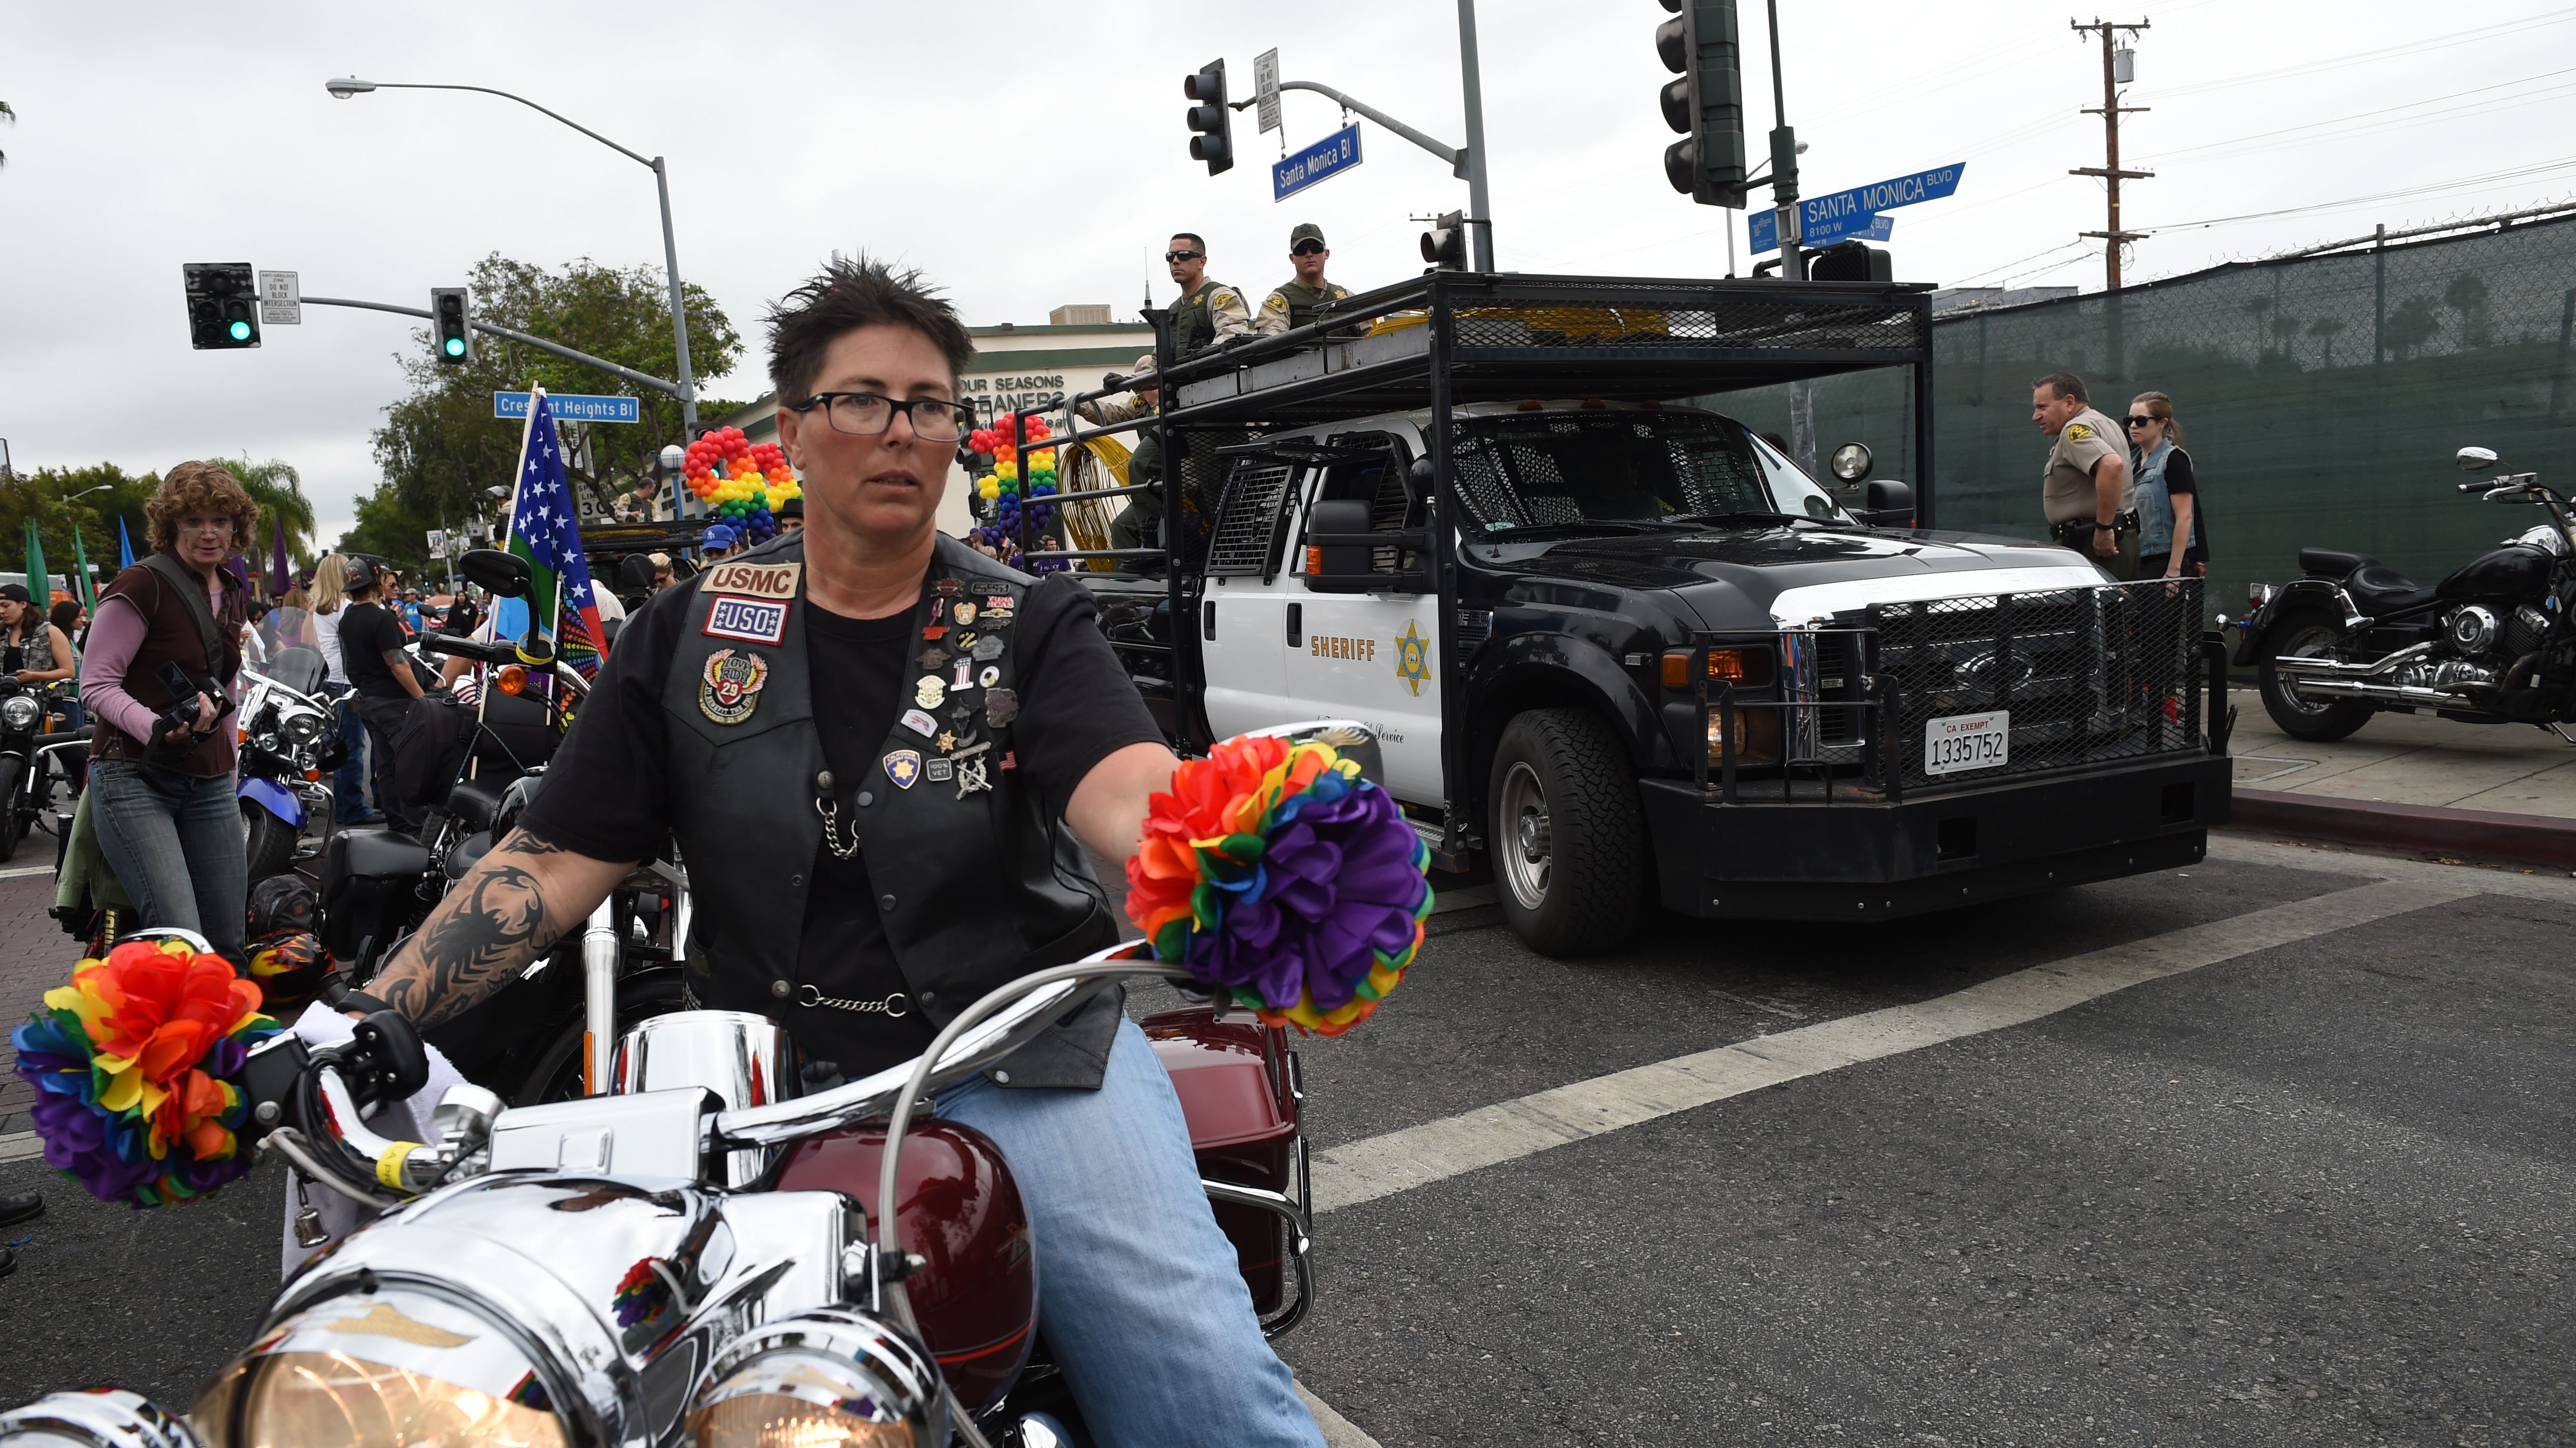 Police stand by to provide security for the 2016 Gay Pride Parade June 12, 20116 in Los Angeles, California. (Getty)